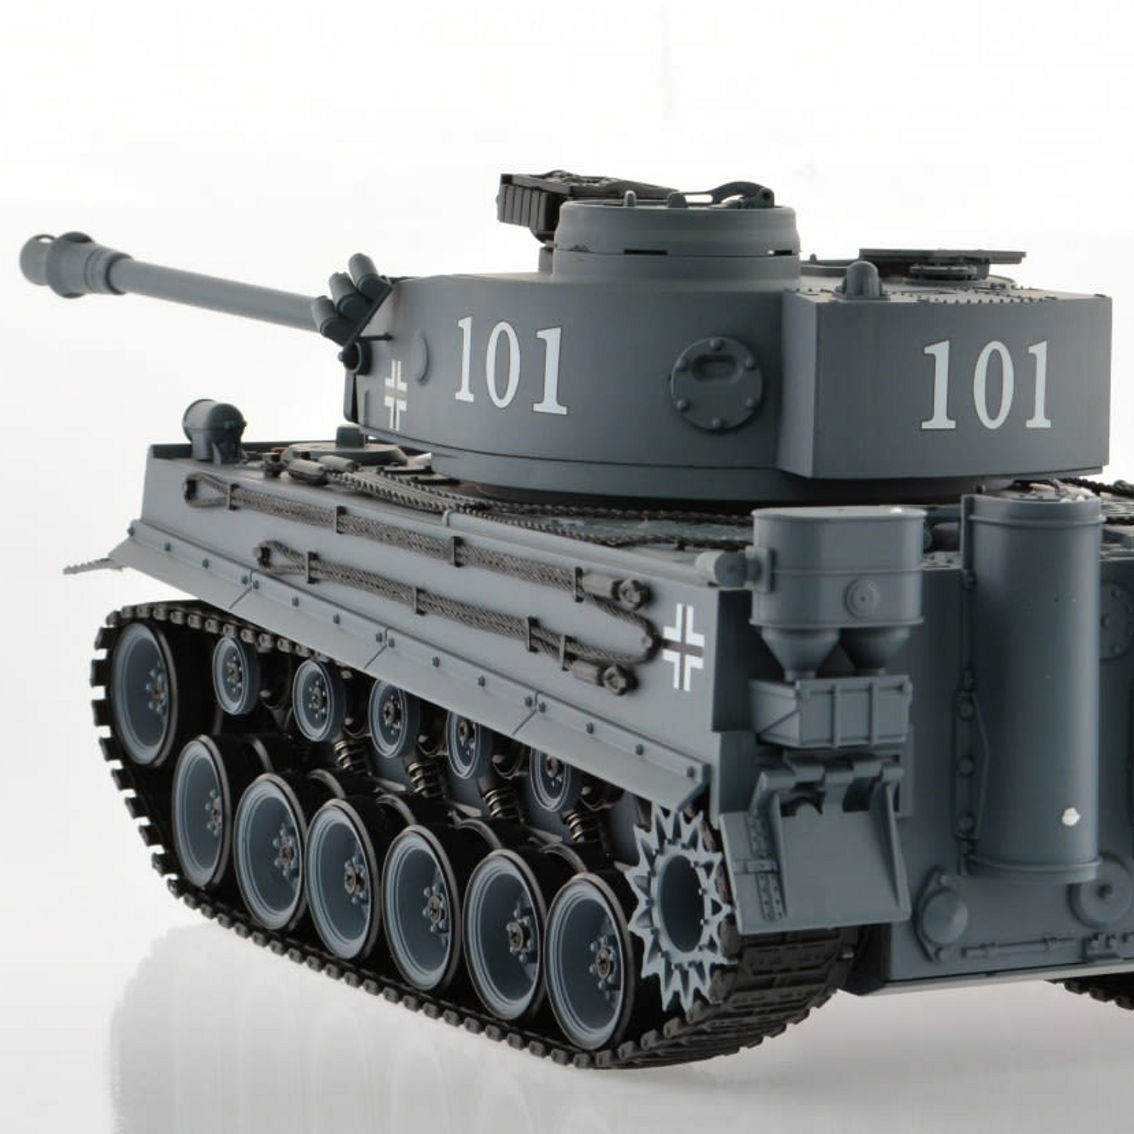 CIS-YZ-812 1:18 scale WWII German Tiger tank with lights sound and BB gun - Image 5 of 5